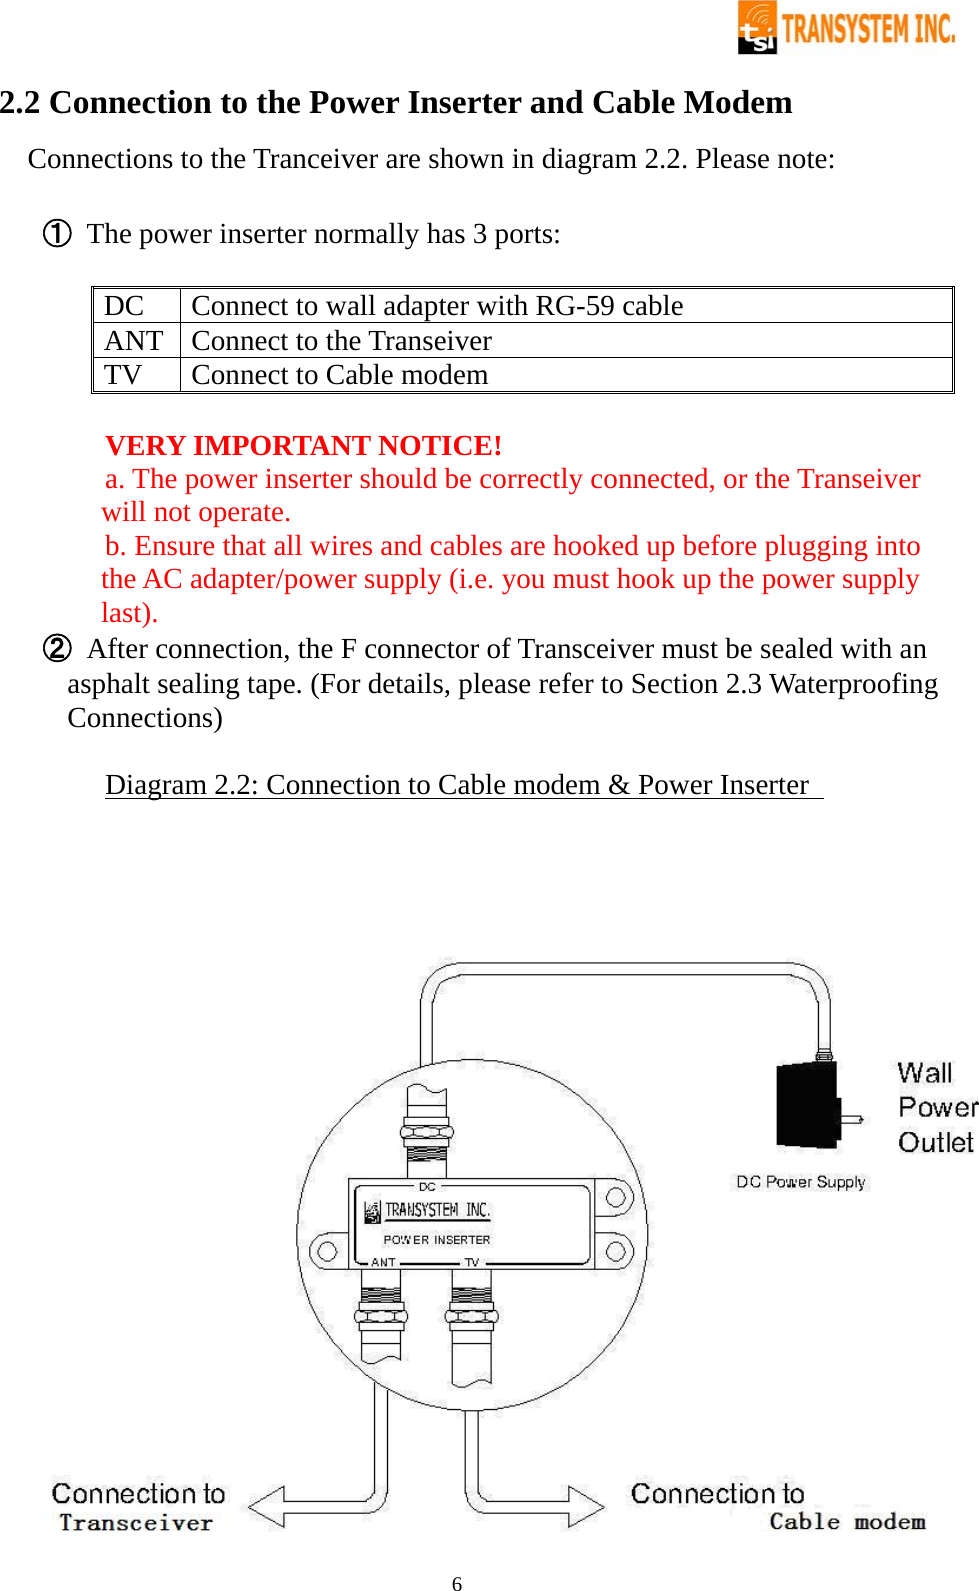   6   2.2 Connection to the Power Inserter and Cable Modem  Connections to the Tranceiver are shown in diagram 2.2. Please note:  ① The power inserter normally has 3 ports:       DC  Connect to wall adapter with RG-59 cable ANT  Connect to the Transeiver TV  Connect to Cable modem        VERY IMPORTANT NOTICE!   a. The power inserter should be correctly connected, or the Transeiver will not operate.    b. Ensure that all wires and cables are hooked up before plugging into the AC adapter/power supply (i.e. you must hook up the power supply last).  ② After connection, the F connector of Transceiver must be sealed with an asphalt sealing tape. (For details, please refer to Section 2.3 Waterproofing Connections)      Diagram 2.2: Connection to Cable modem &amp; Power Inserter     